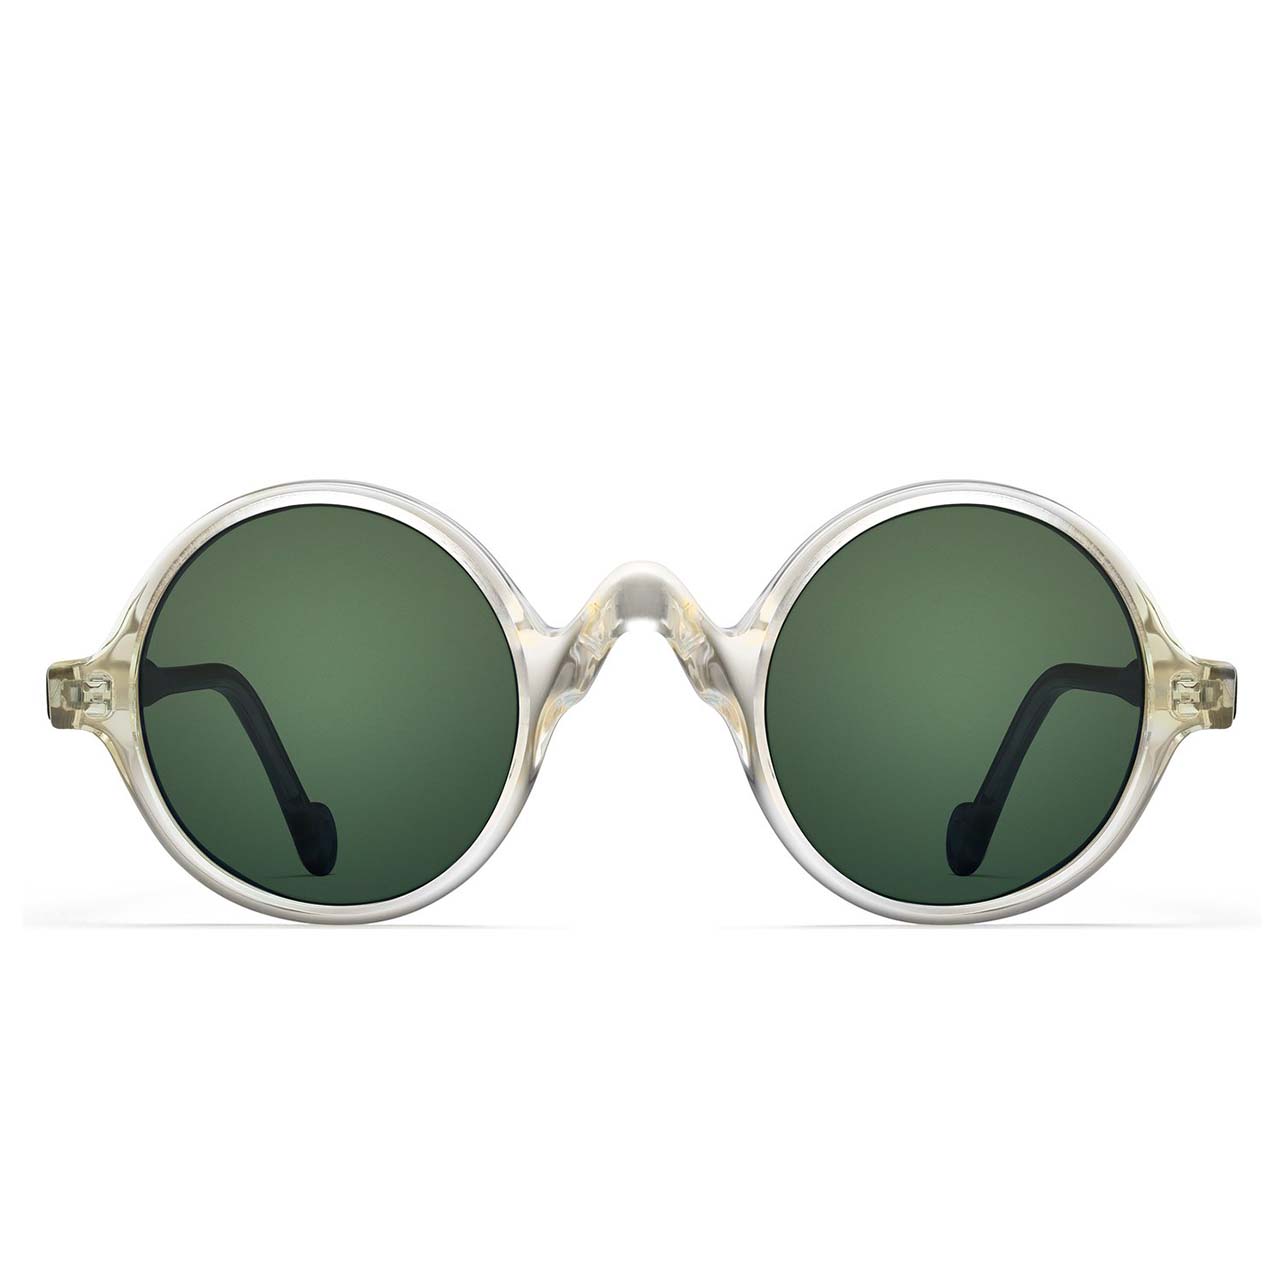 Morgenthal Frederics circular sunglasses with green lens